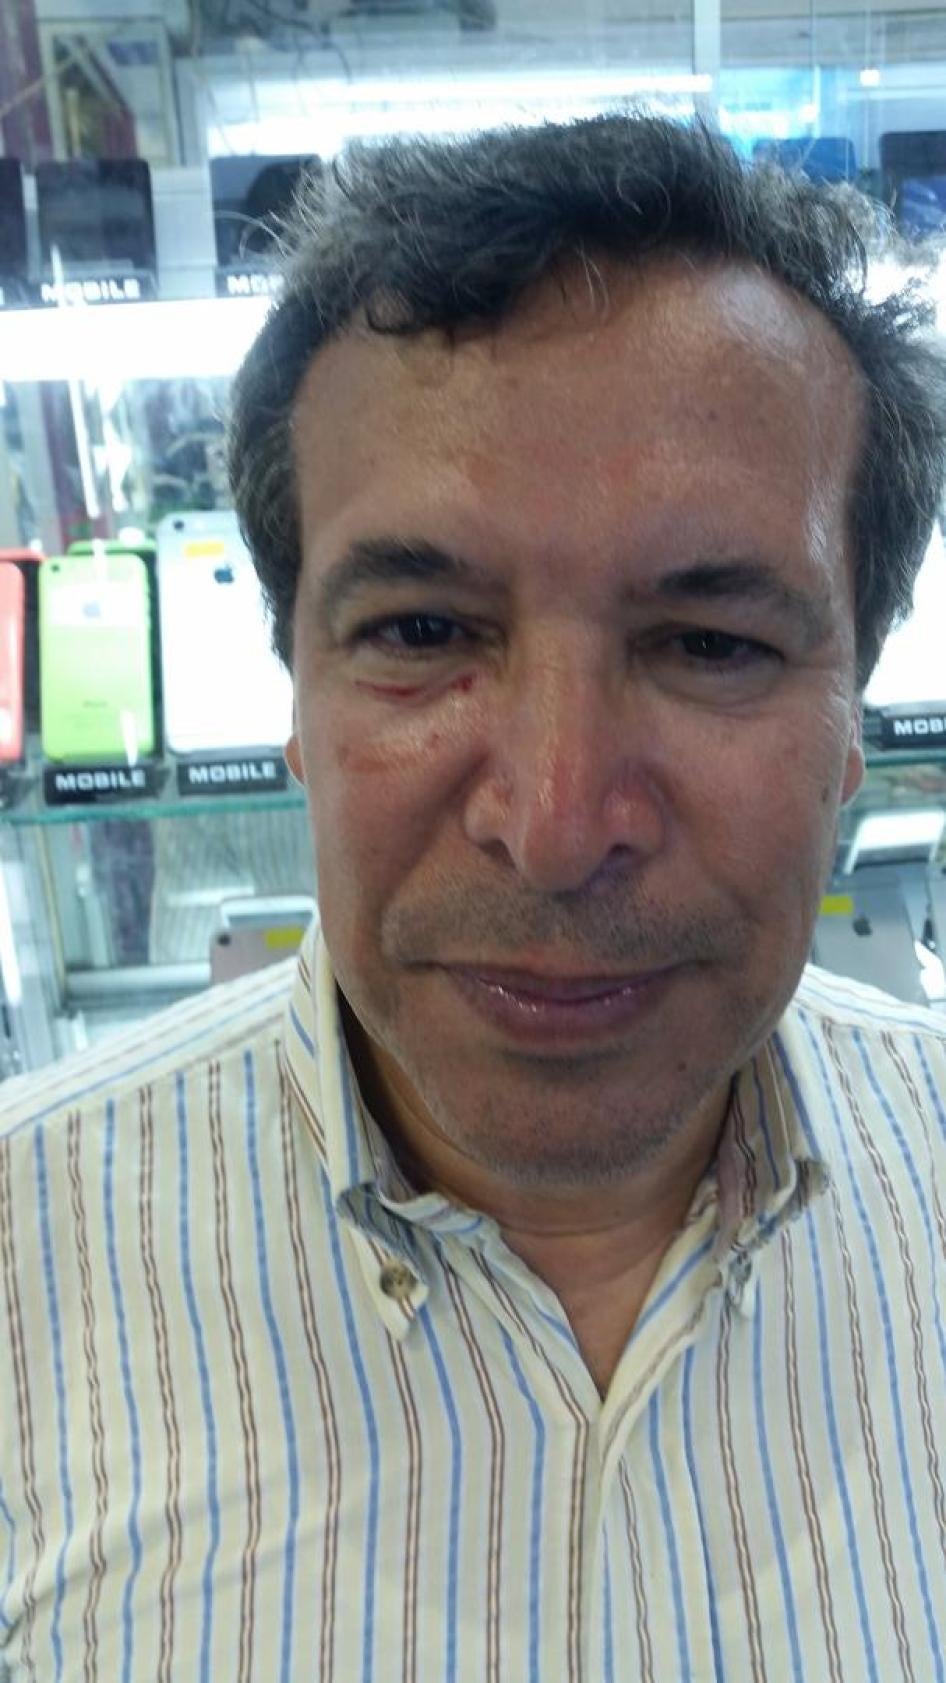 Lawyer Abdelaziz Nouaydi, after a policeman punched him in the face when breaking up a small sit-in in Rabat.